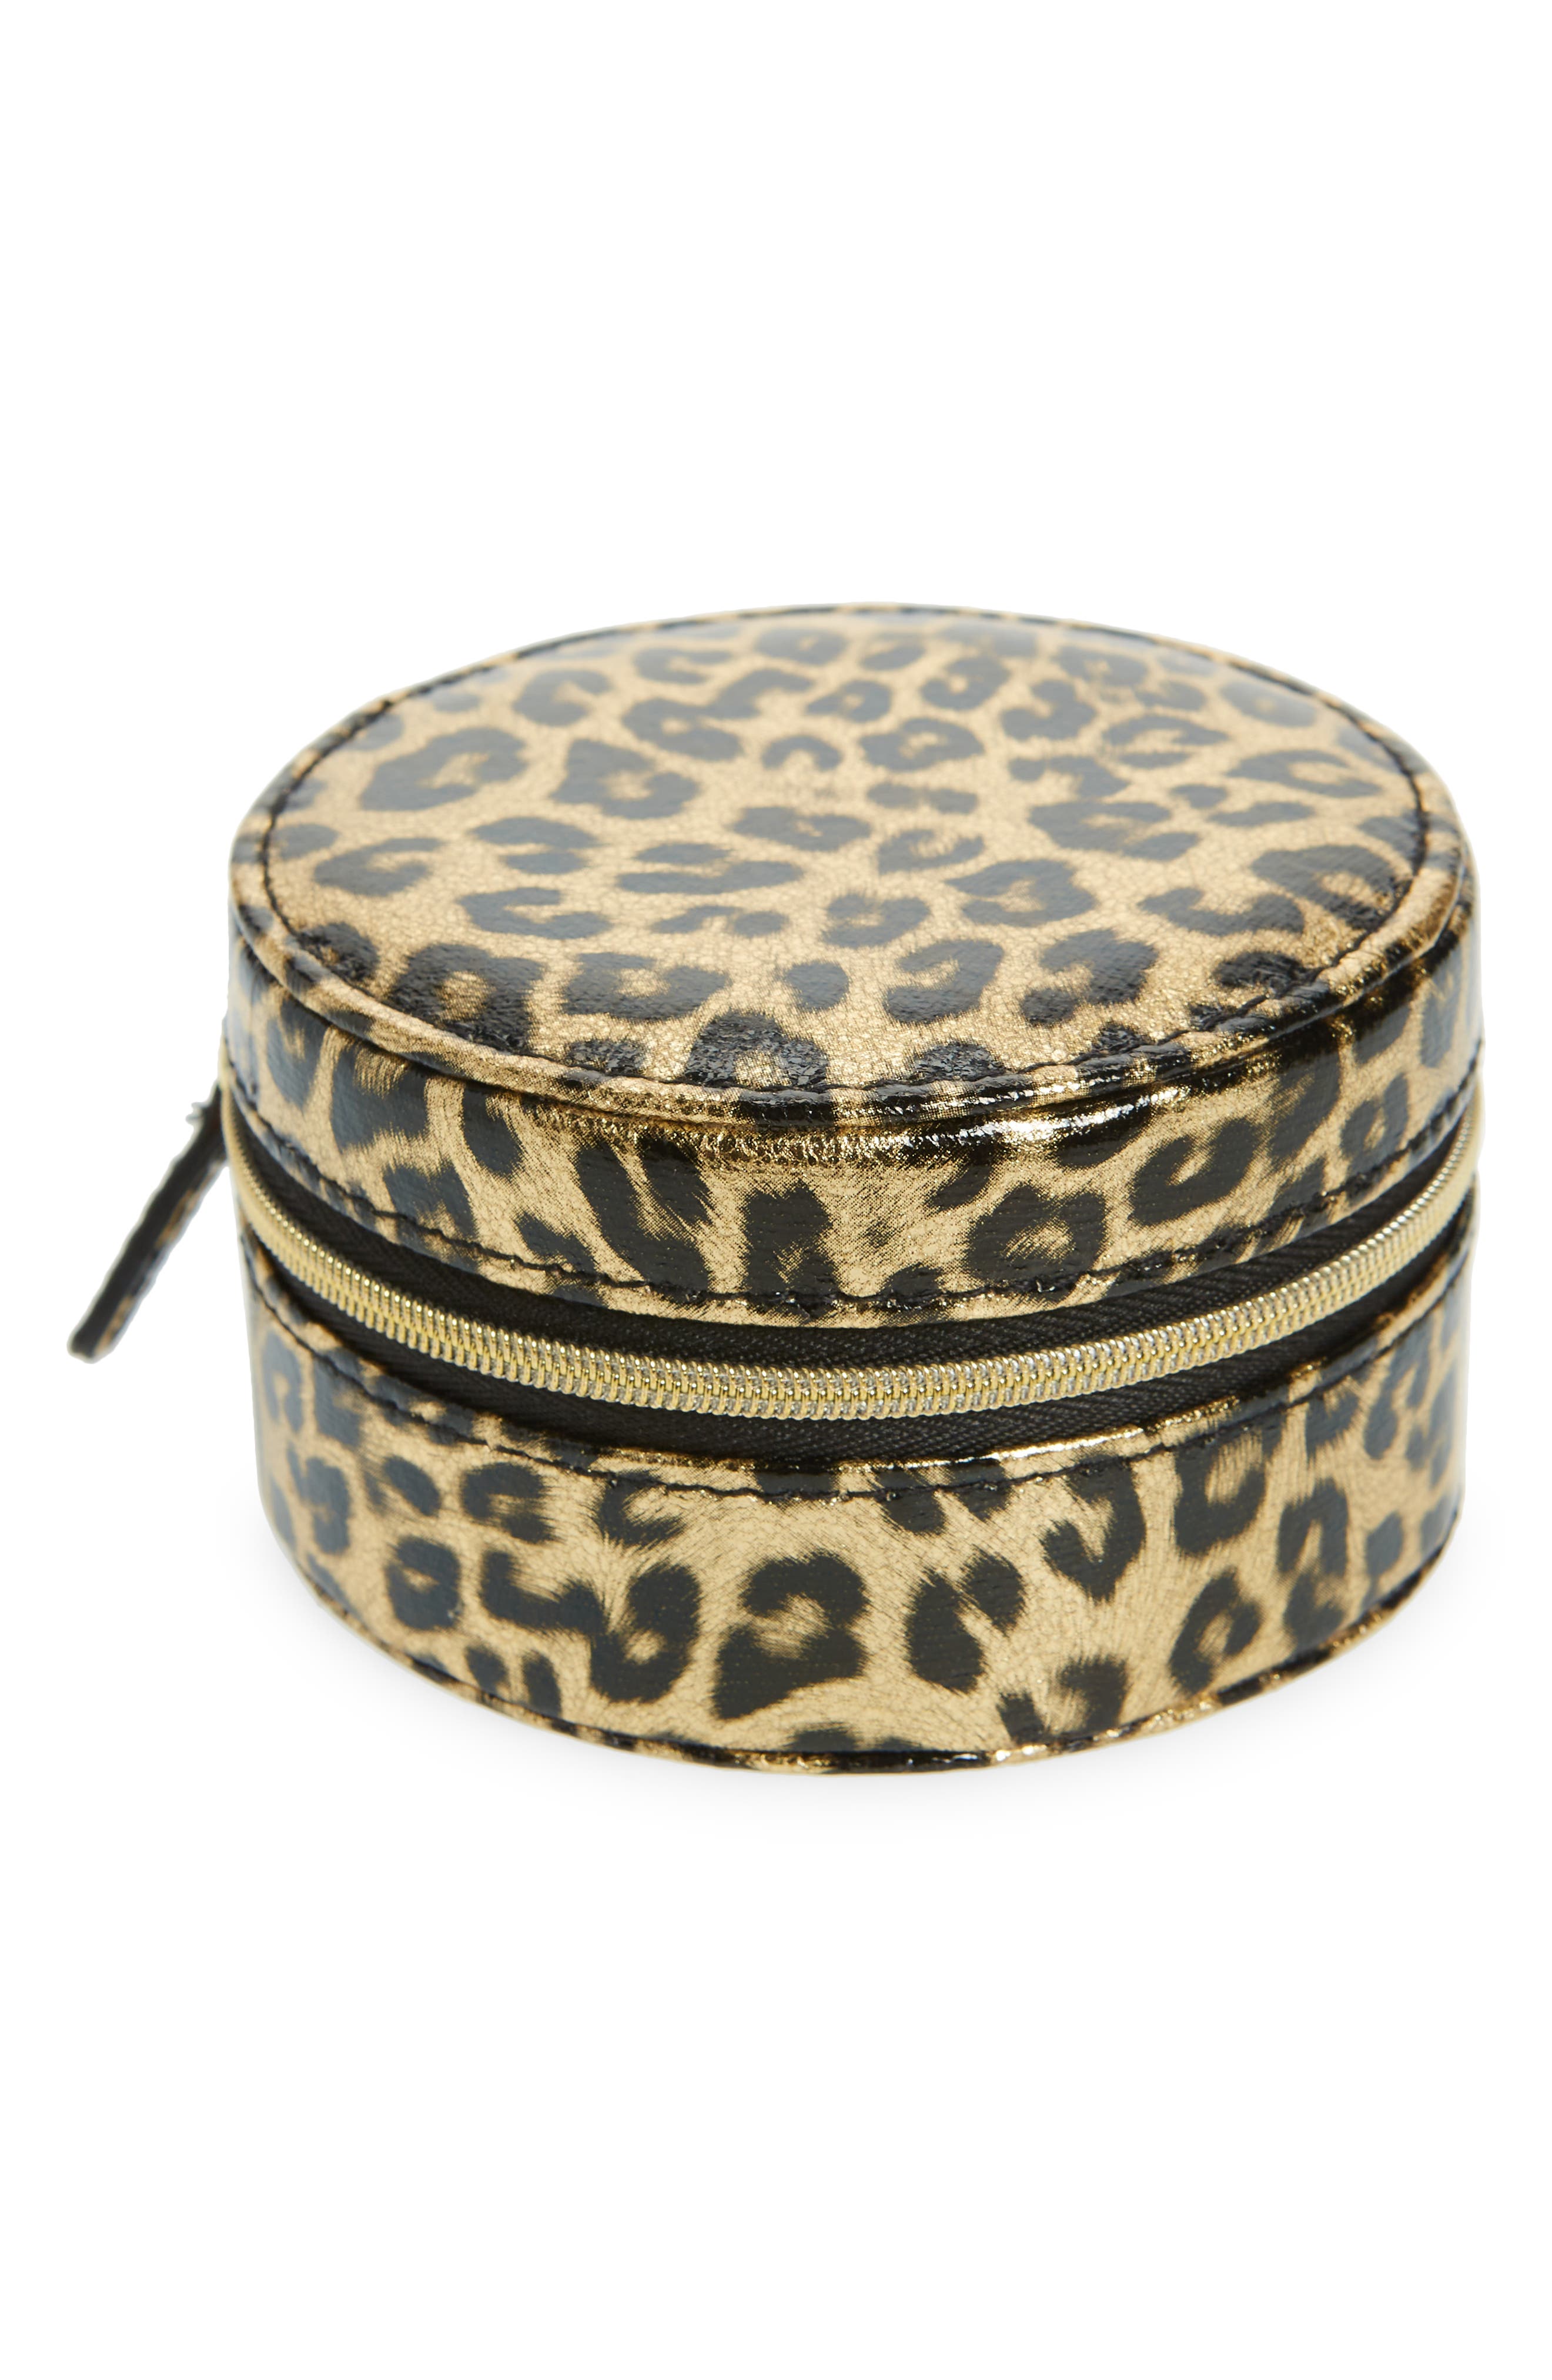 BAGSMART Travel Jewelry Organizer Case Small Jewelry Roll for  Journey-Rings, Necklaces, Earrings, Bracelets, Leopard Print